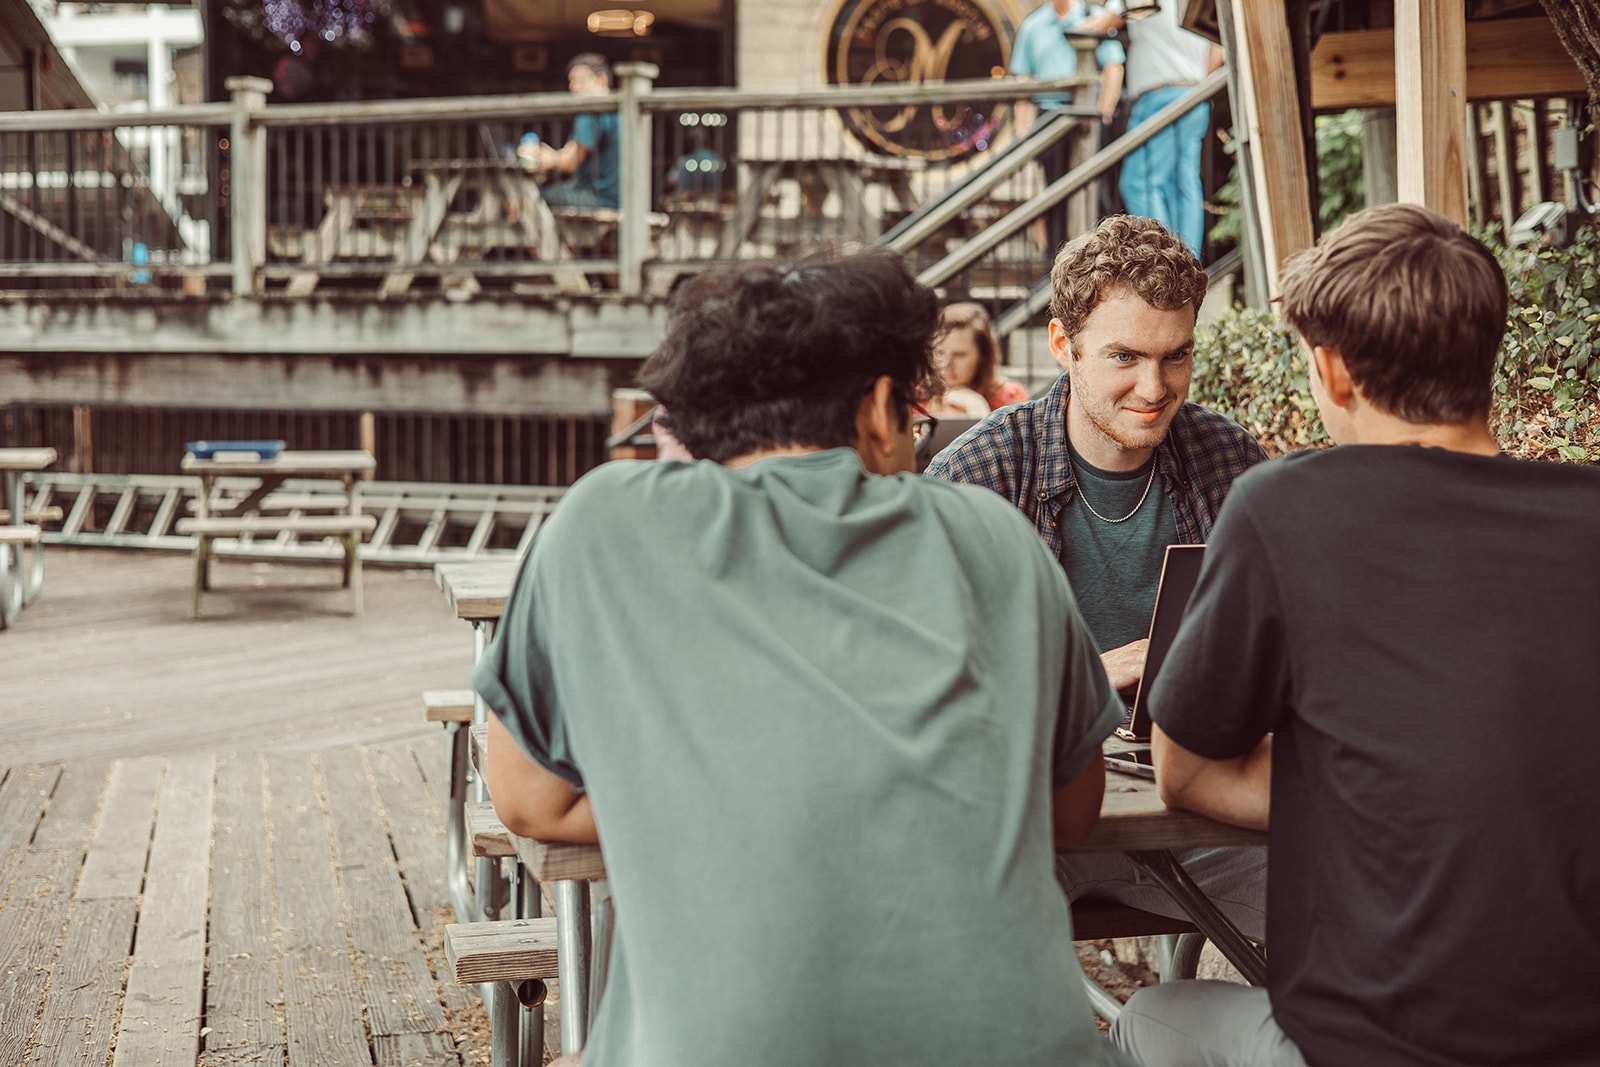 Three UT students study with at a picnic table on the deck of Mozart's Coffee Roasters in Austin.